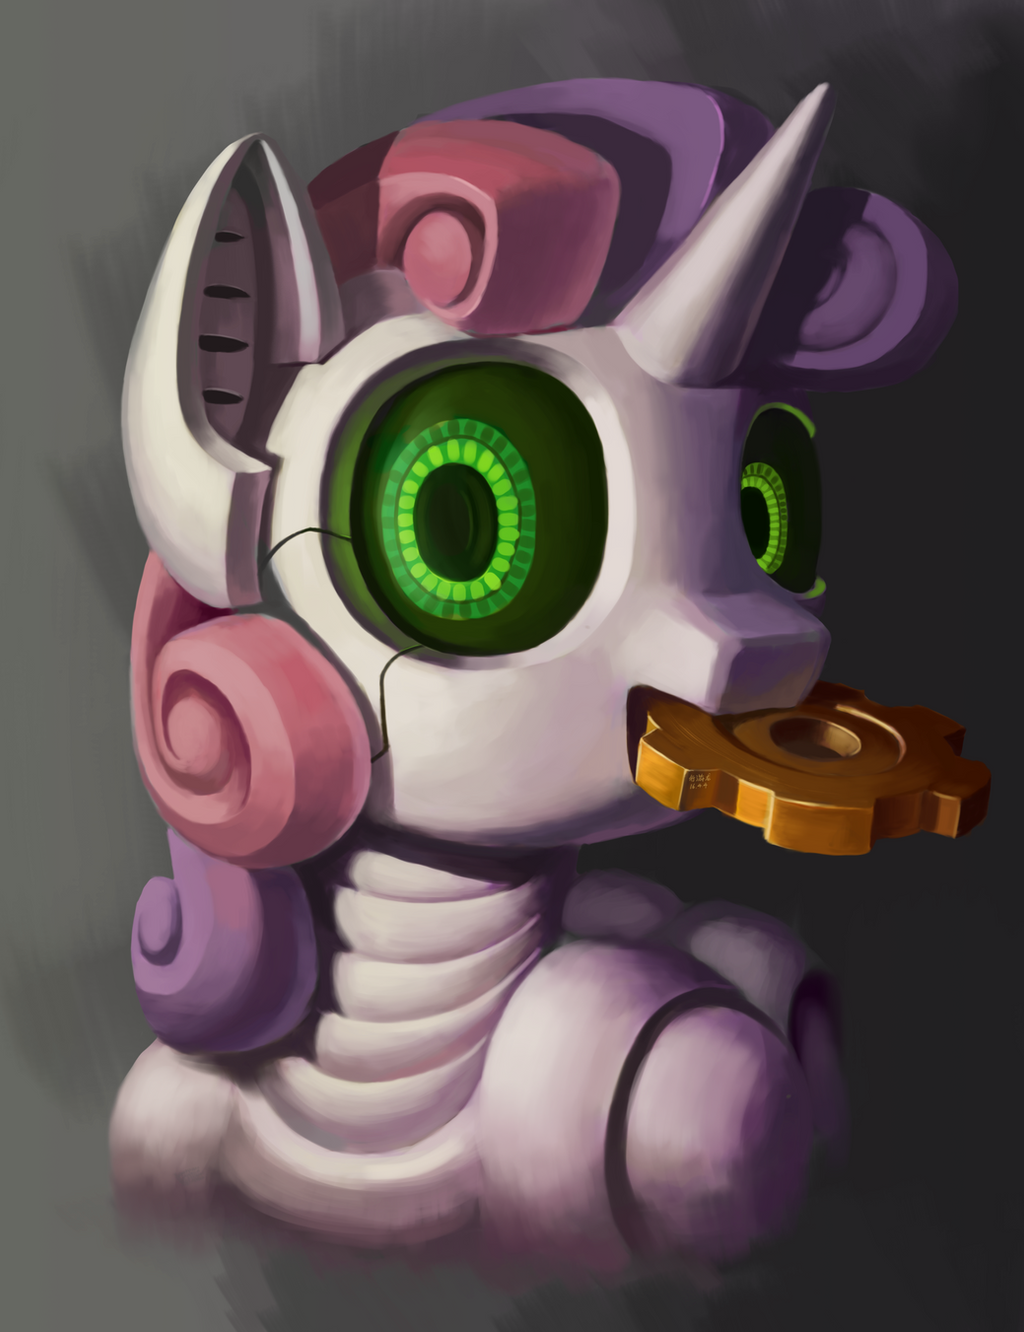 sweetie_bot_by_draconidsmxz-d9xtygm.png